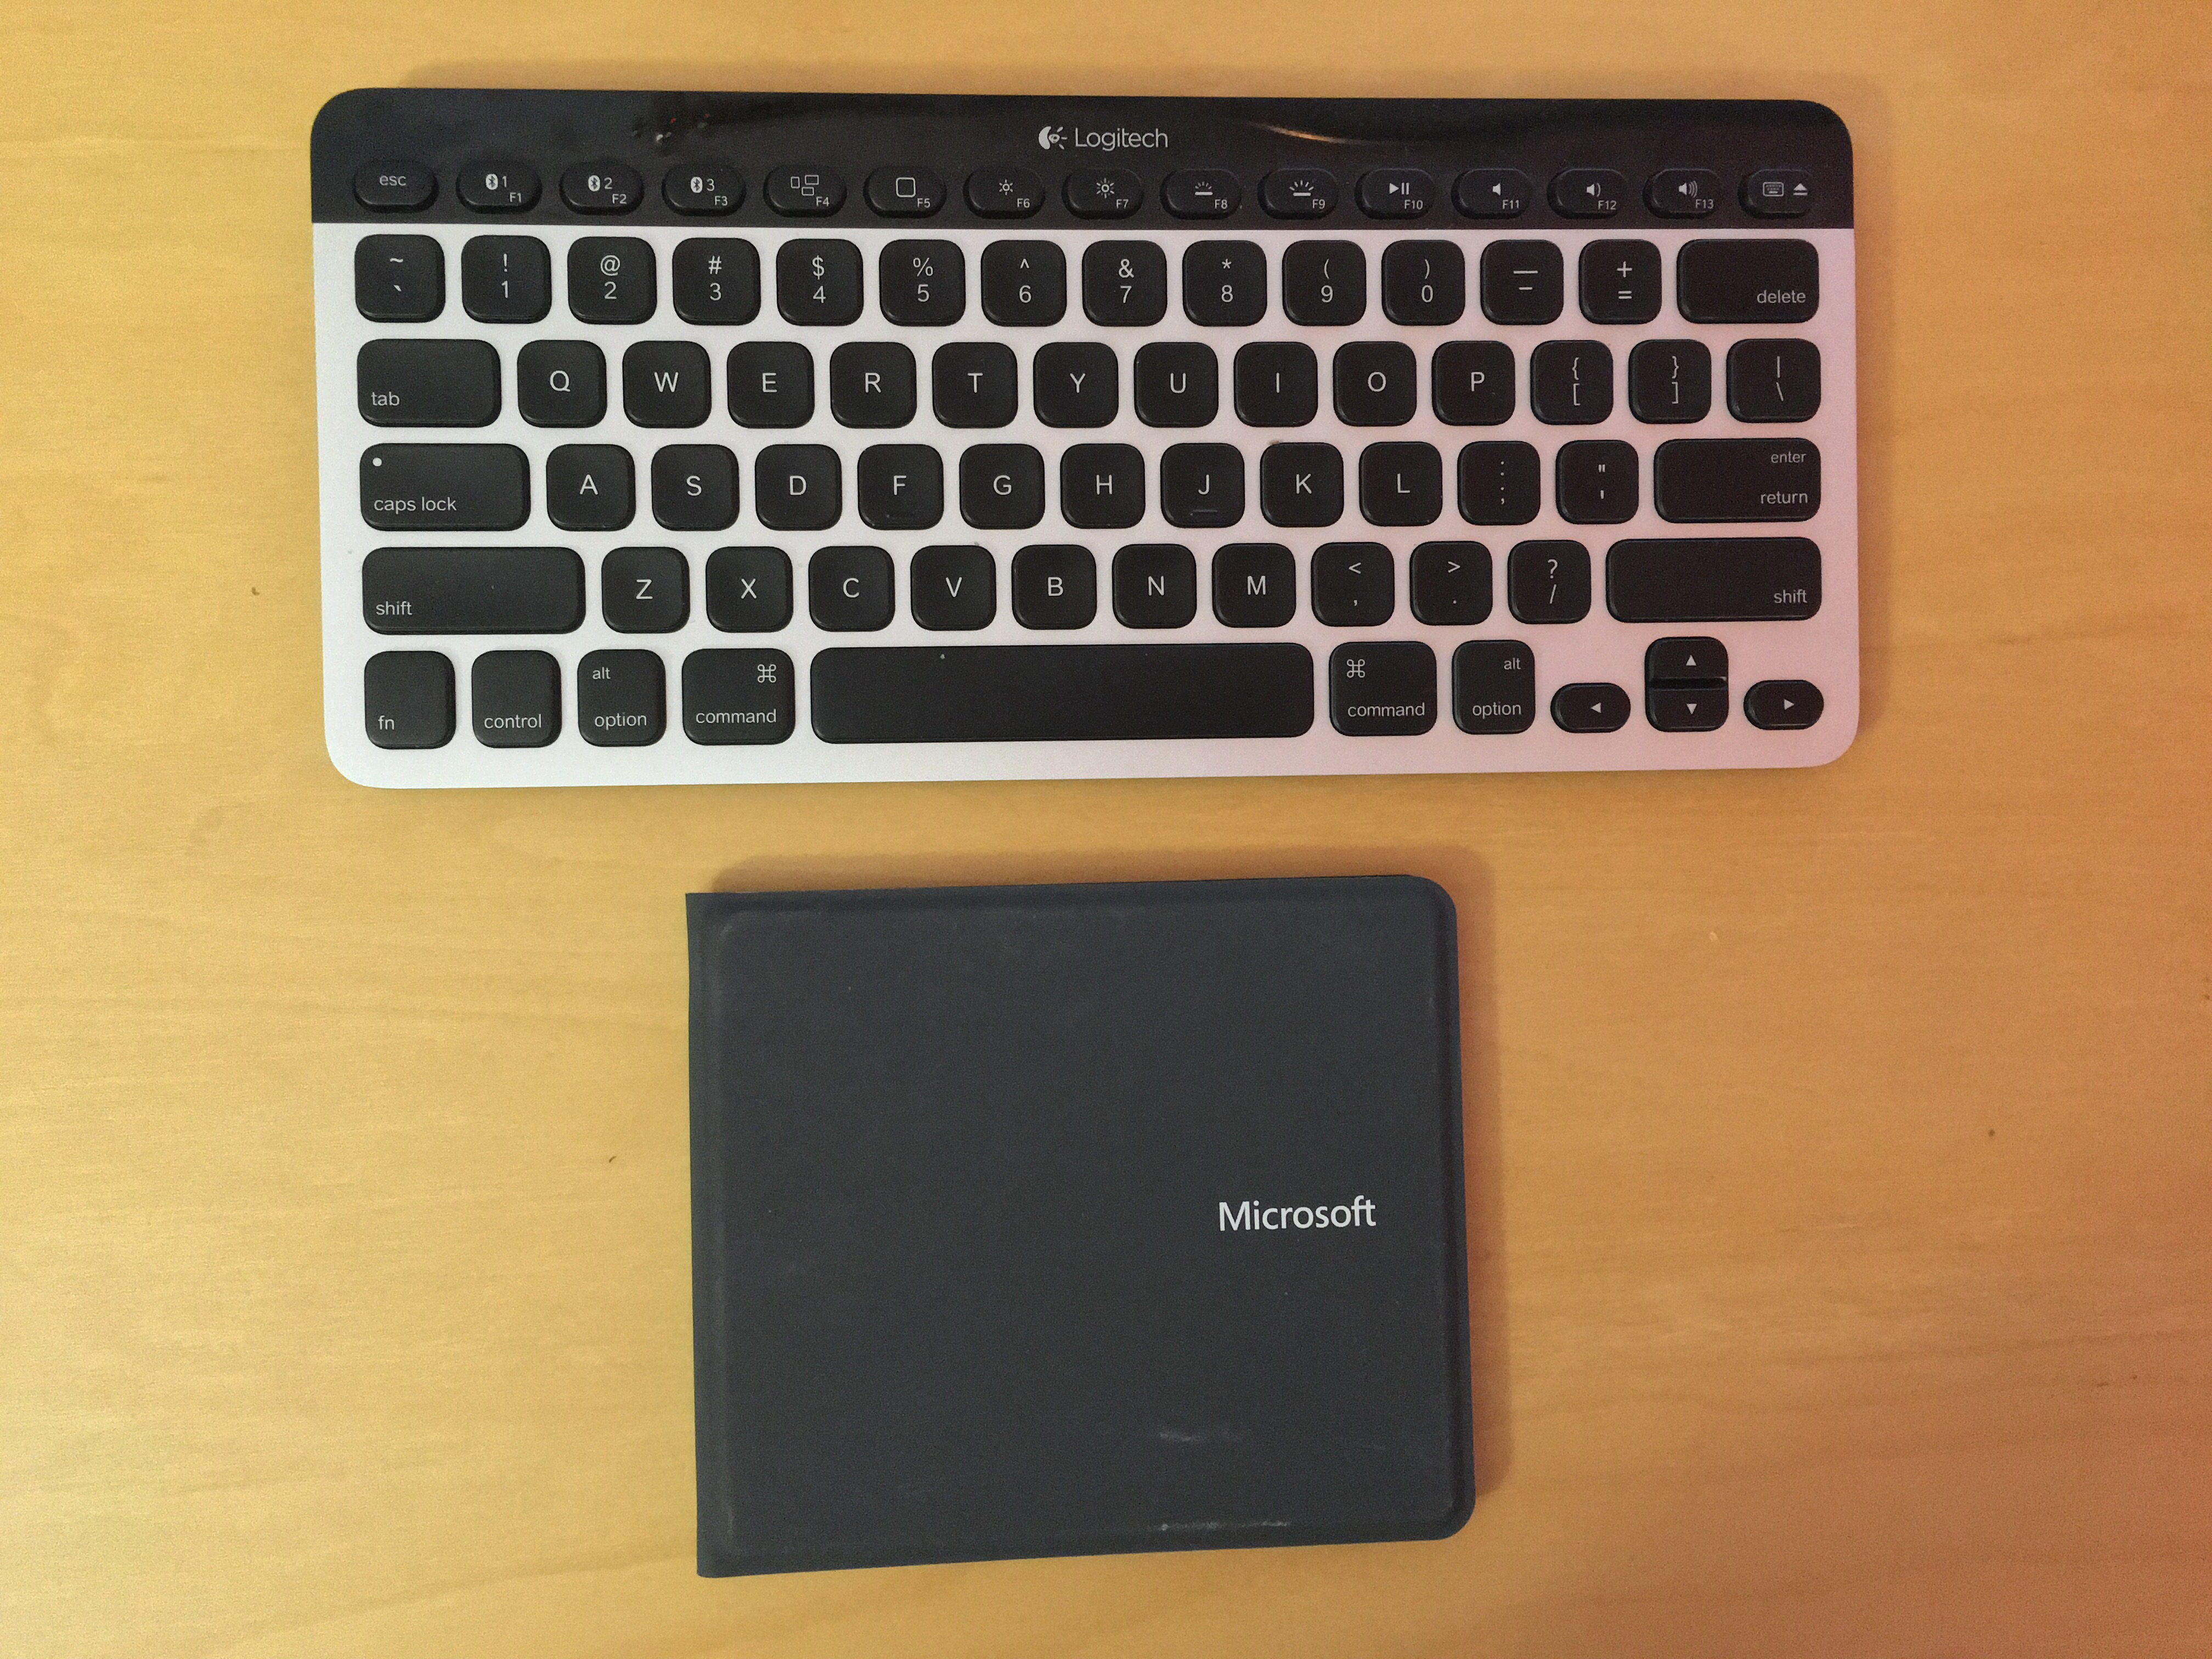 The Microsoft Universal Foldable Keyboard is half the size and a tad lighter than the Logitech K811 Easy-Switch Keyboard